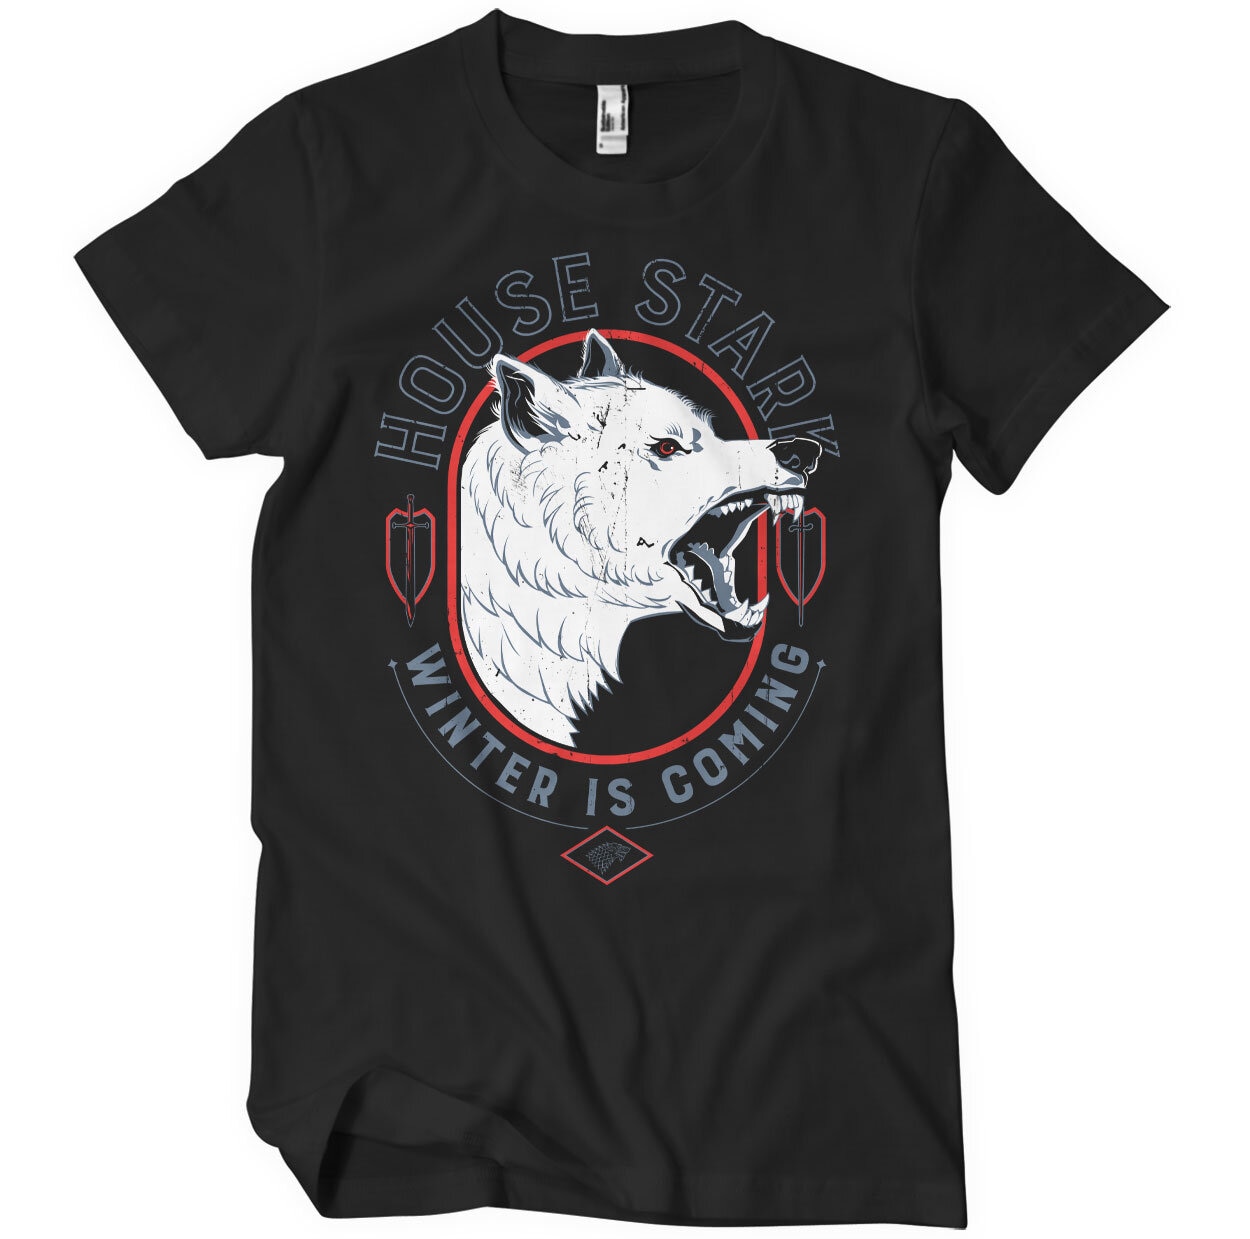 House Stark - Winter Is Coming T-Shirt